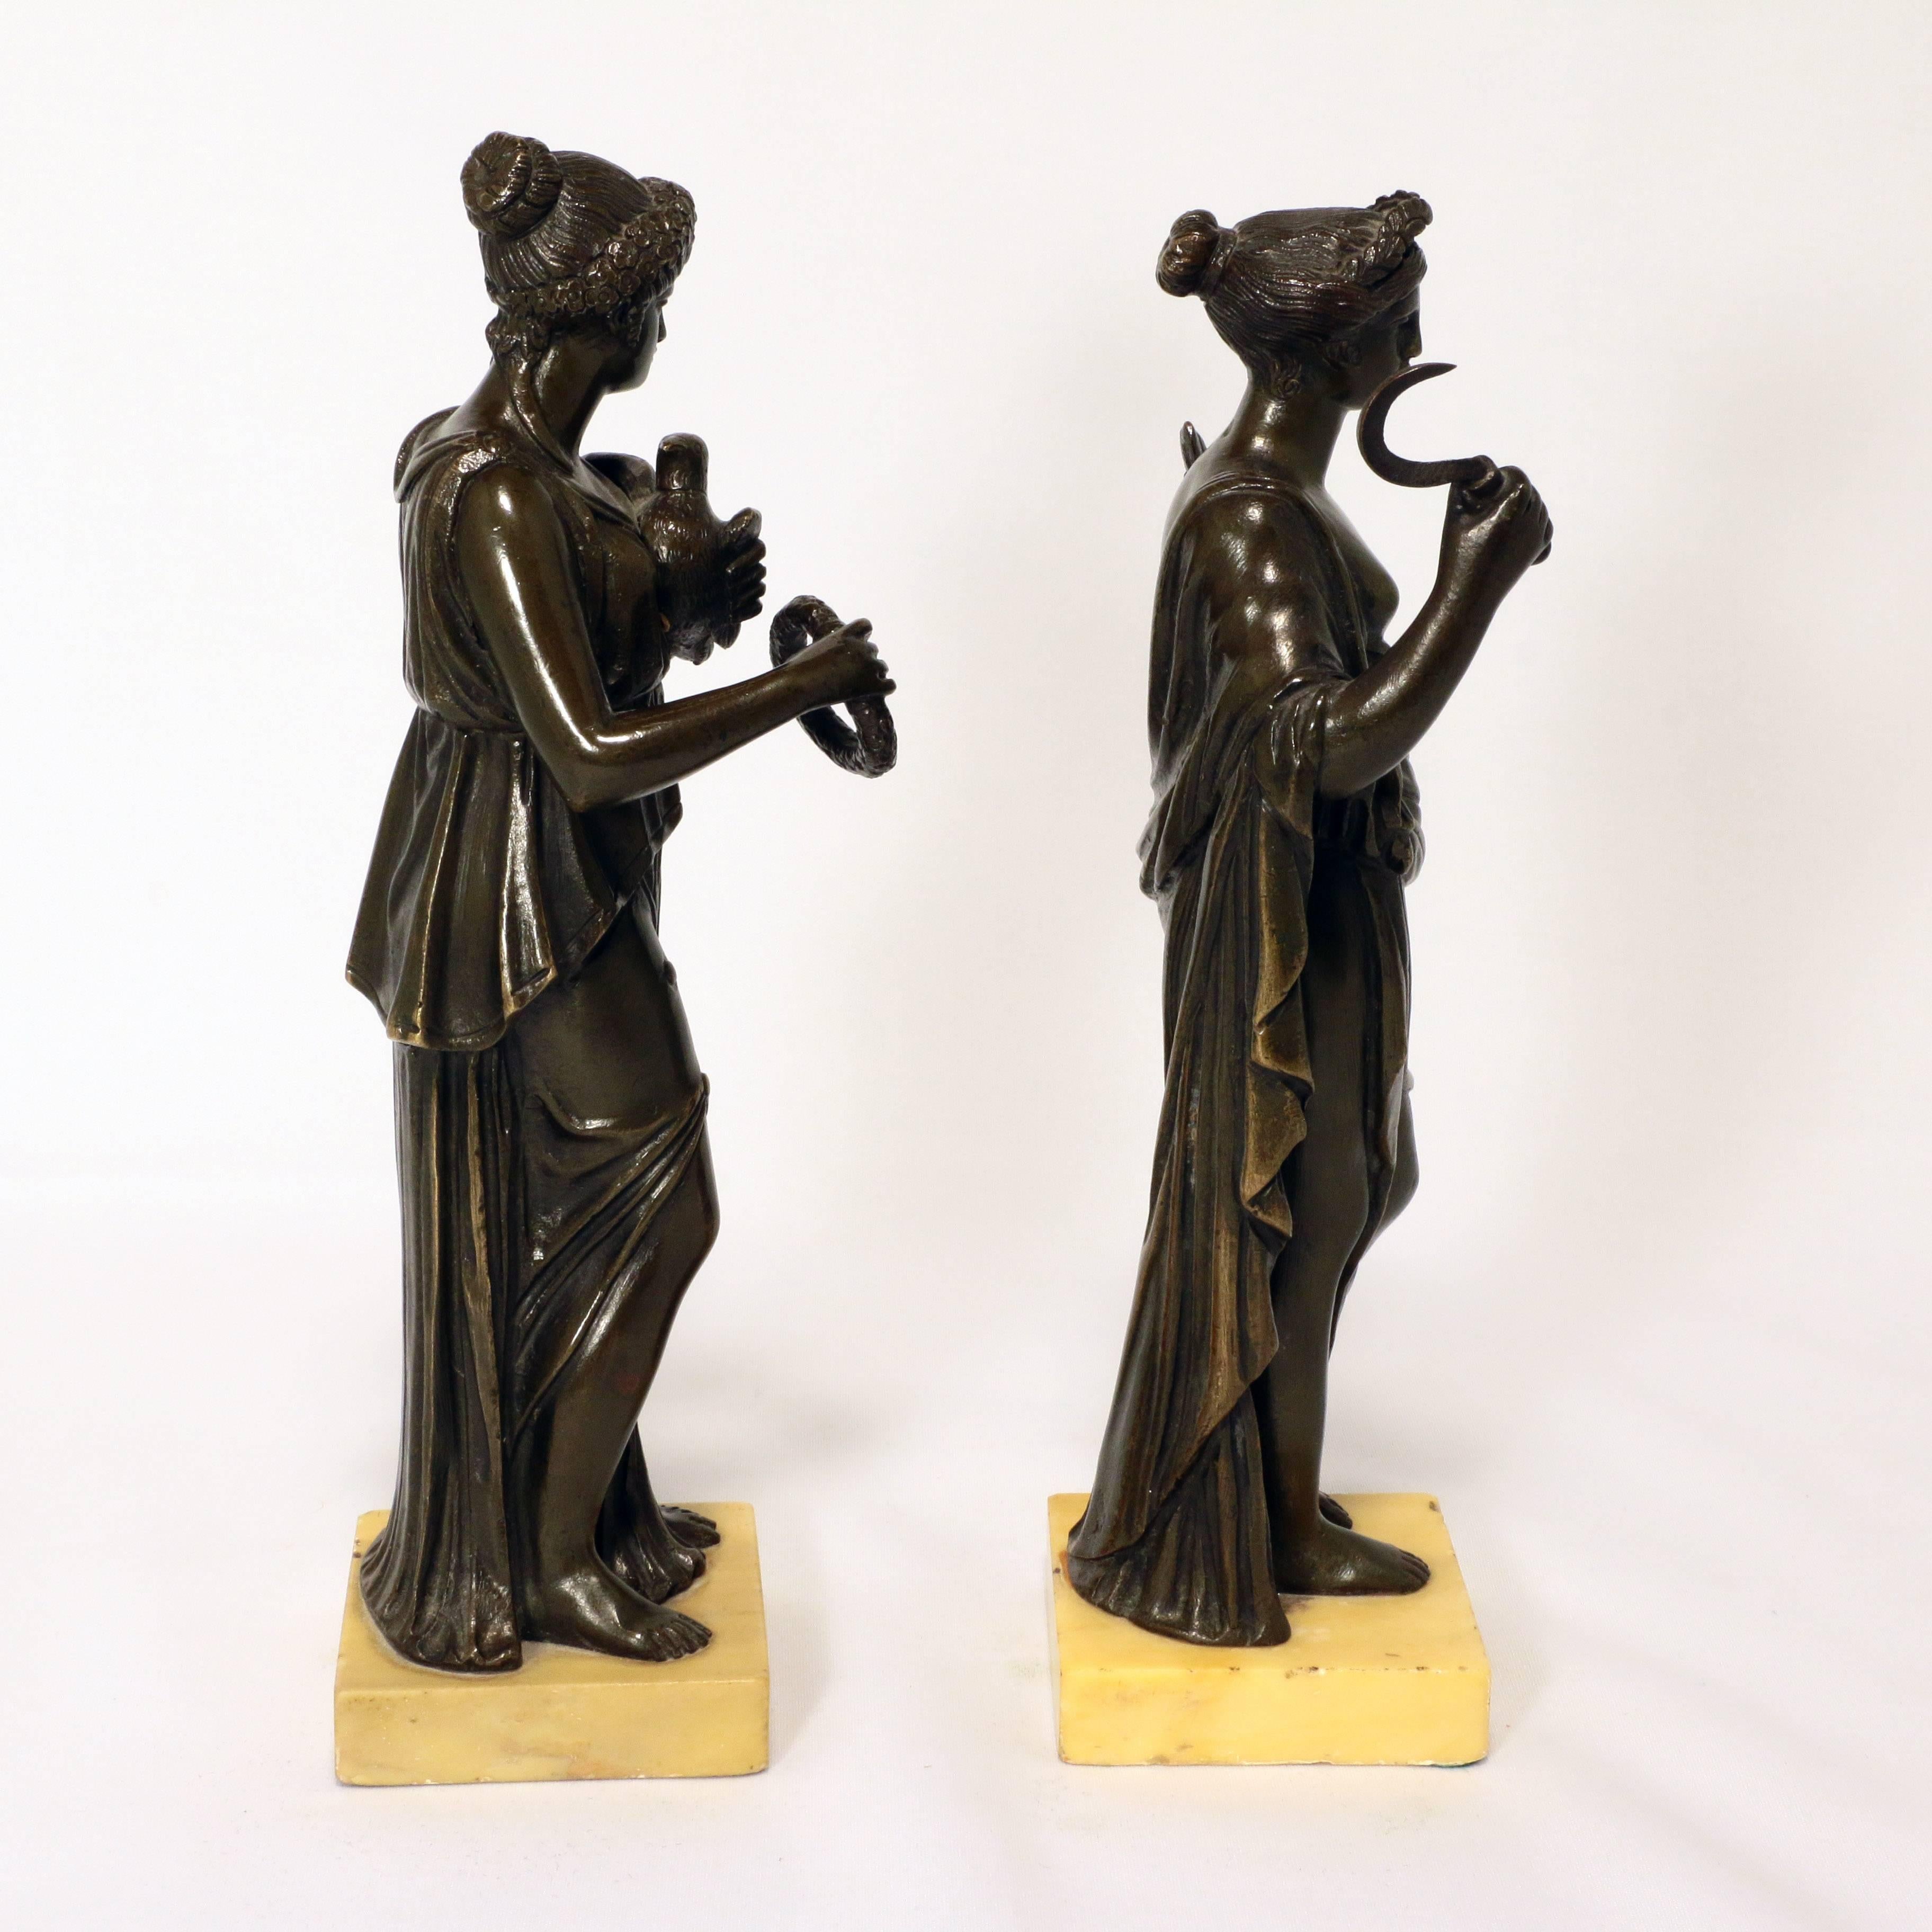 This striking pair, one of Ceres, emblematic of the harvest, the other with a dove and laurel wreath are well modelled as elegant figures in flowing gowns. Each is presented on a square pale ochre marble base.